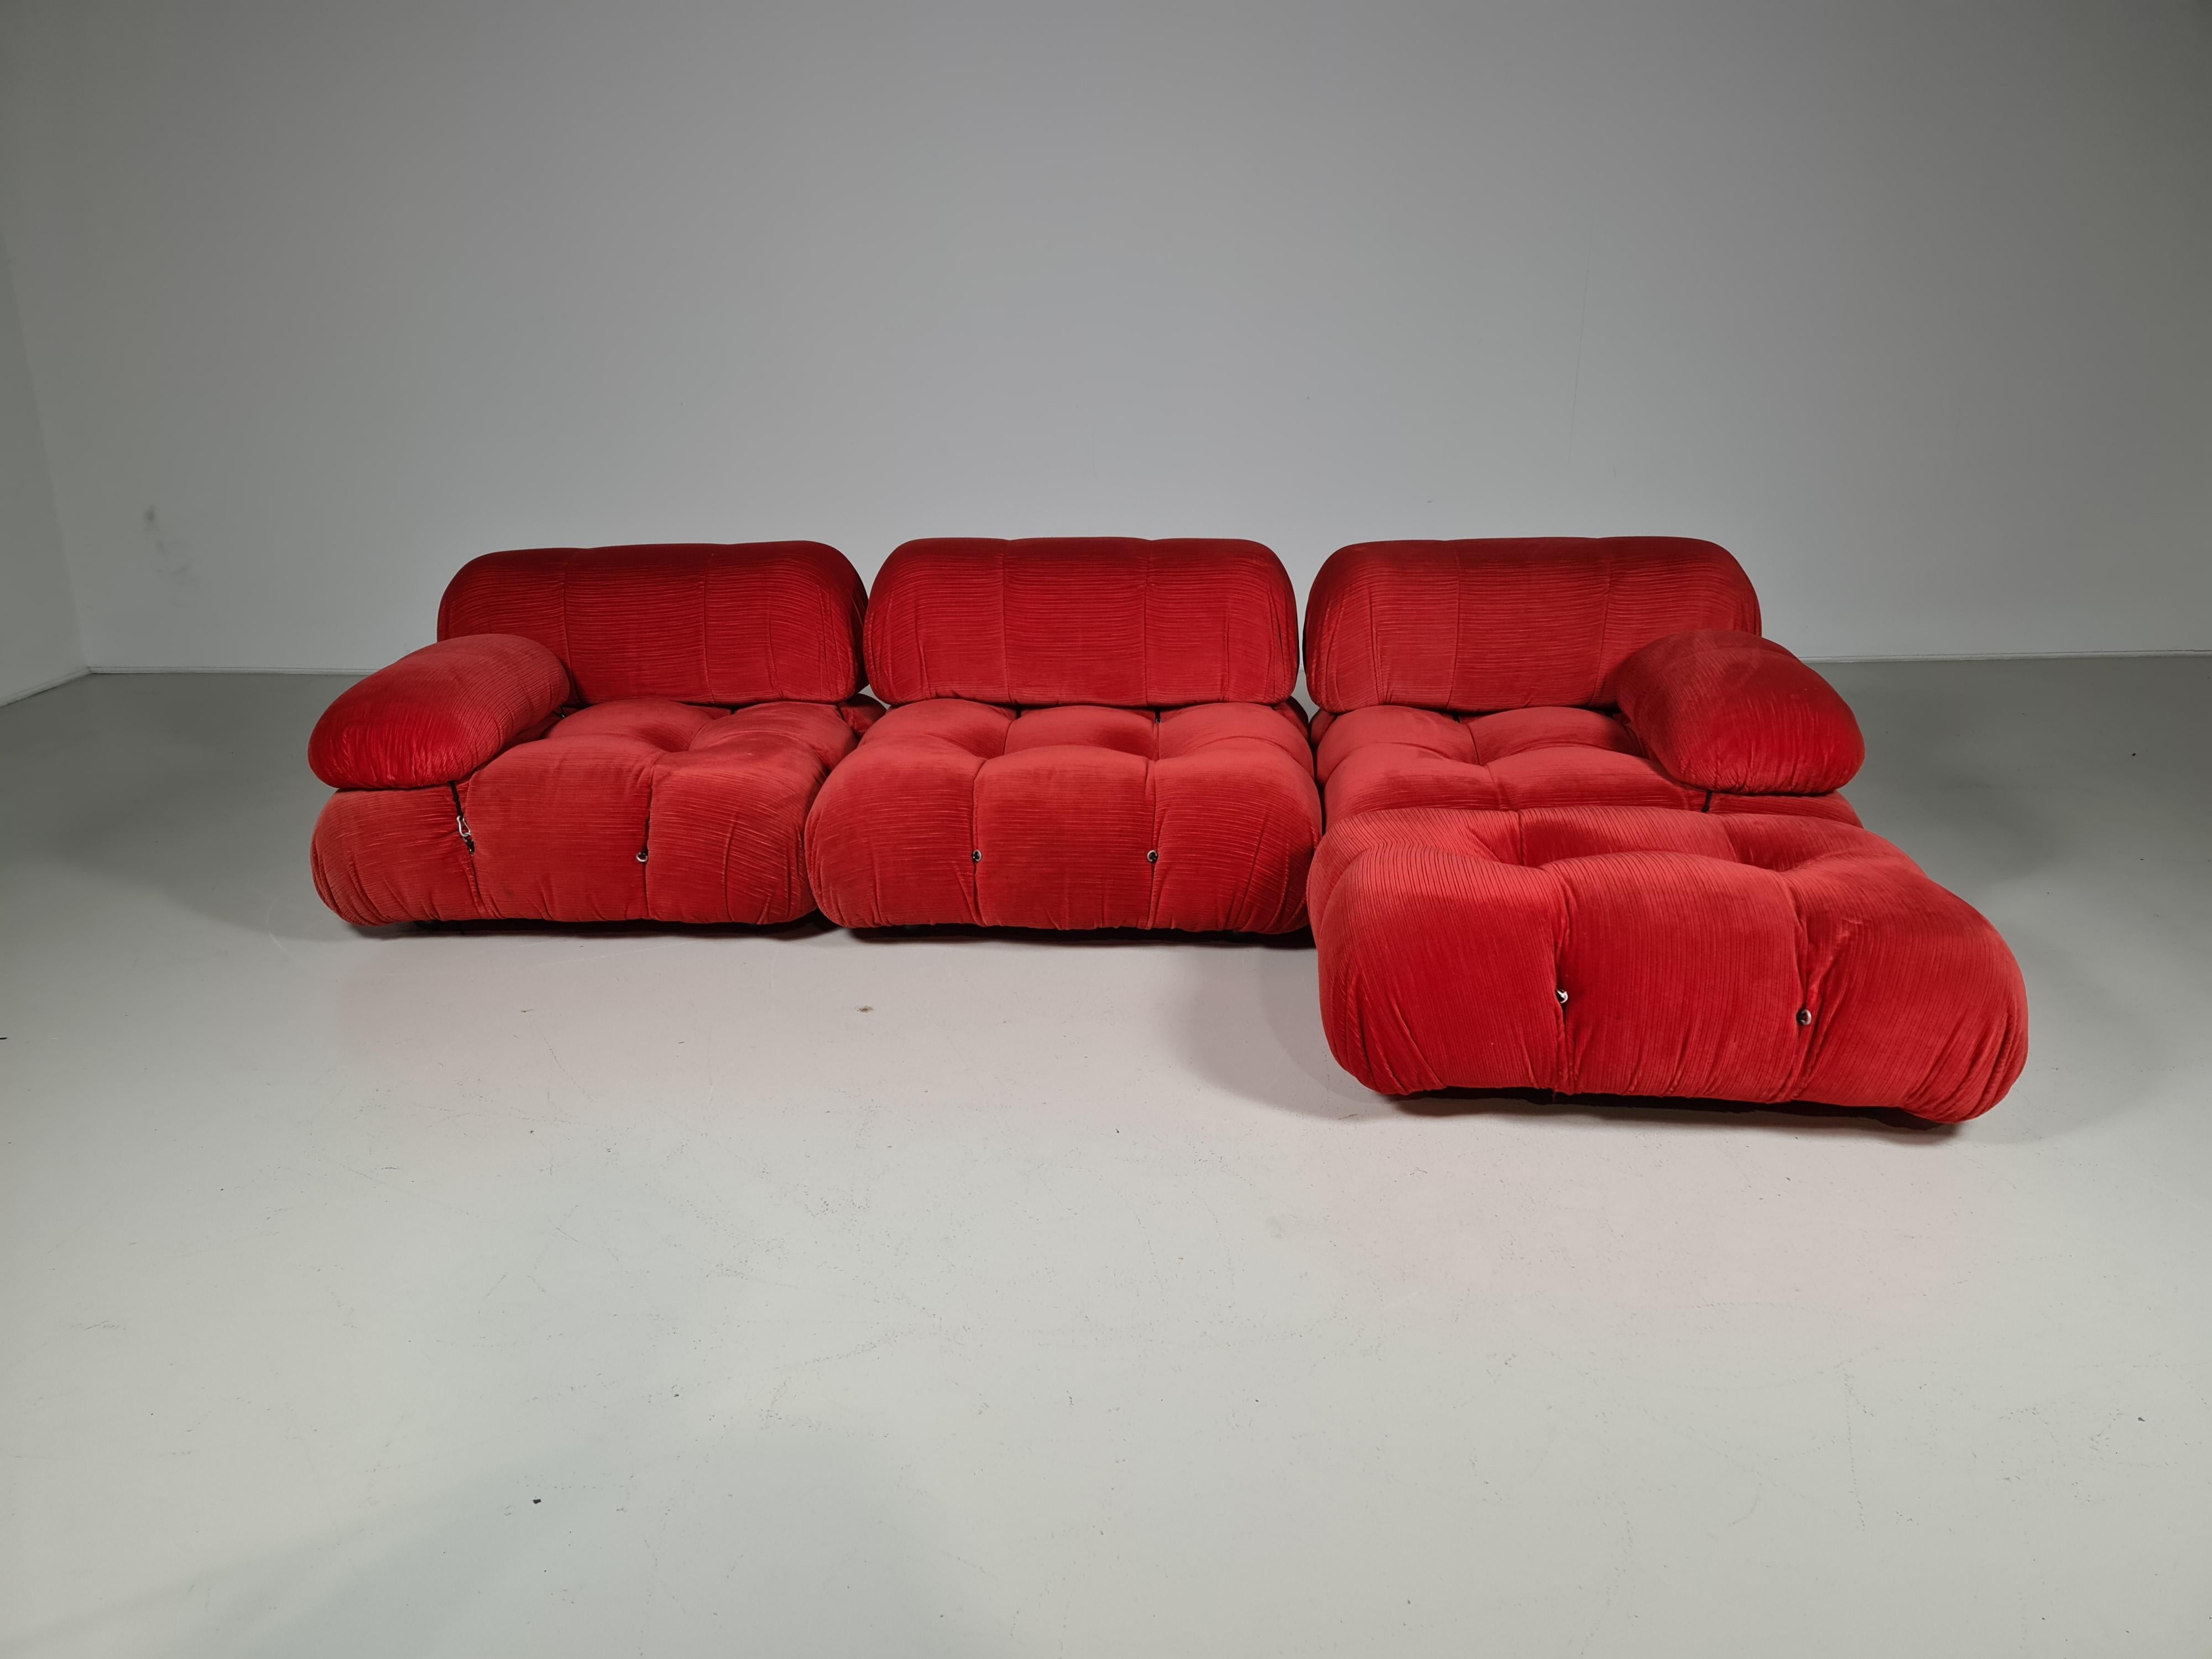 Mario Bellini Camaleonda sofa, Italy, 197s. The sectional elements of this sofa can be used freely and apart from one another. Because the sofa is modular, and backs and armrests are provided with rings and carabiners, you can create many different